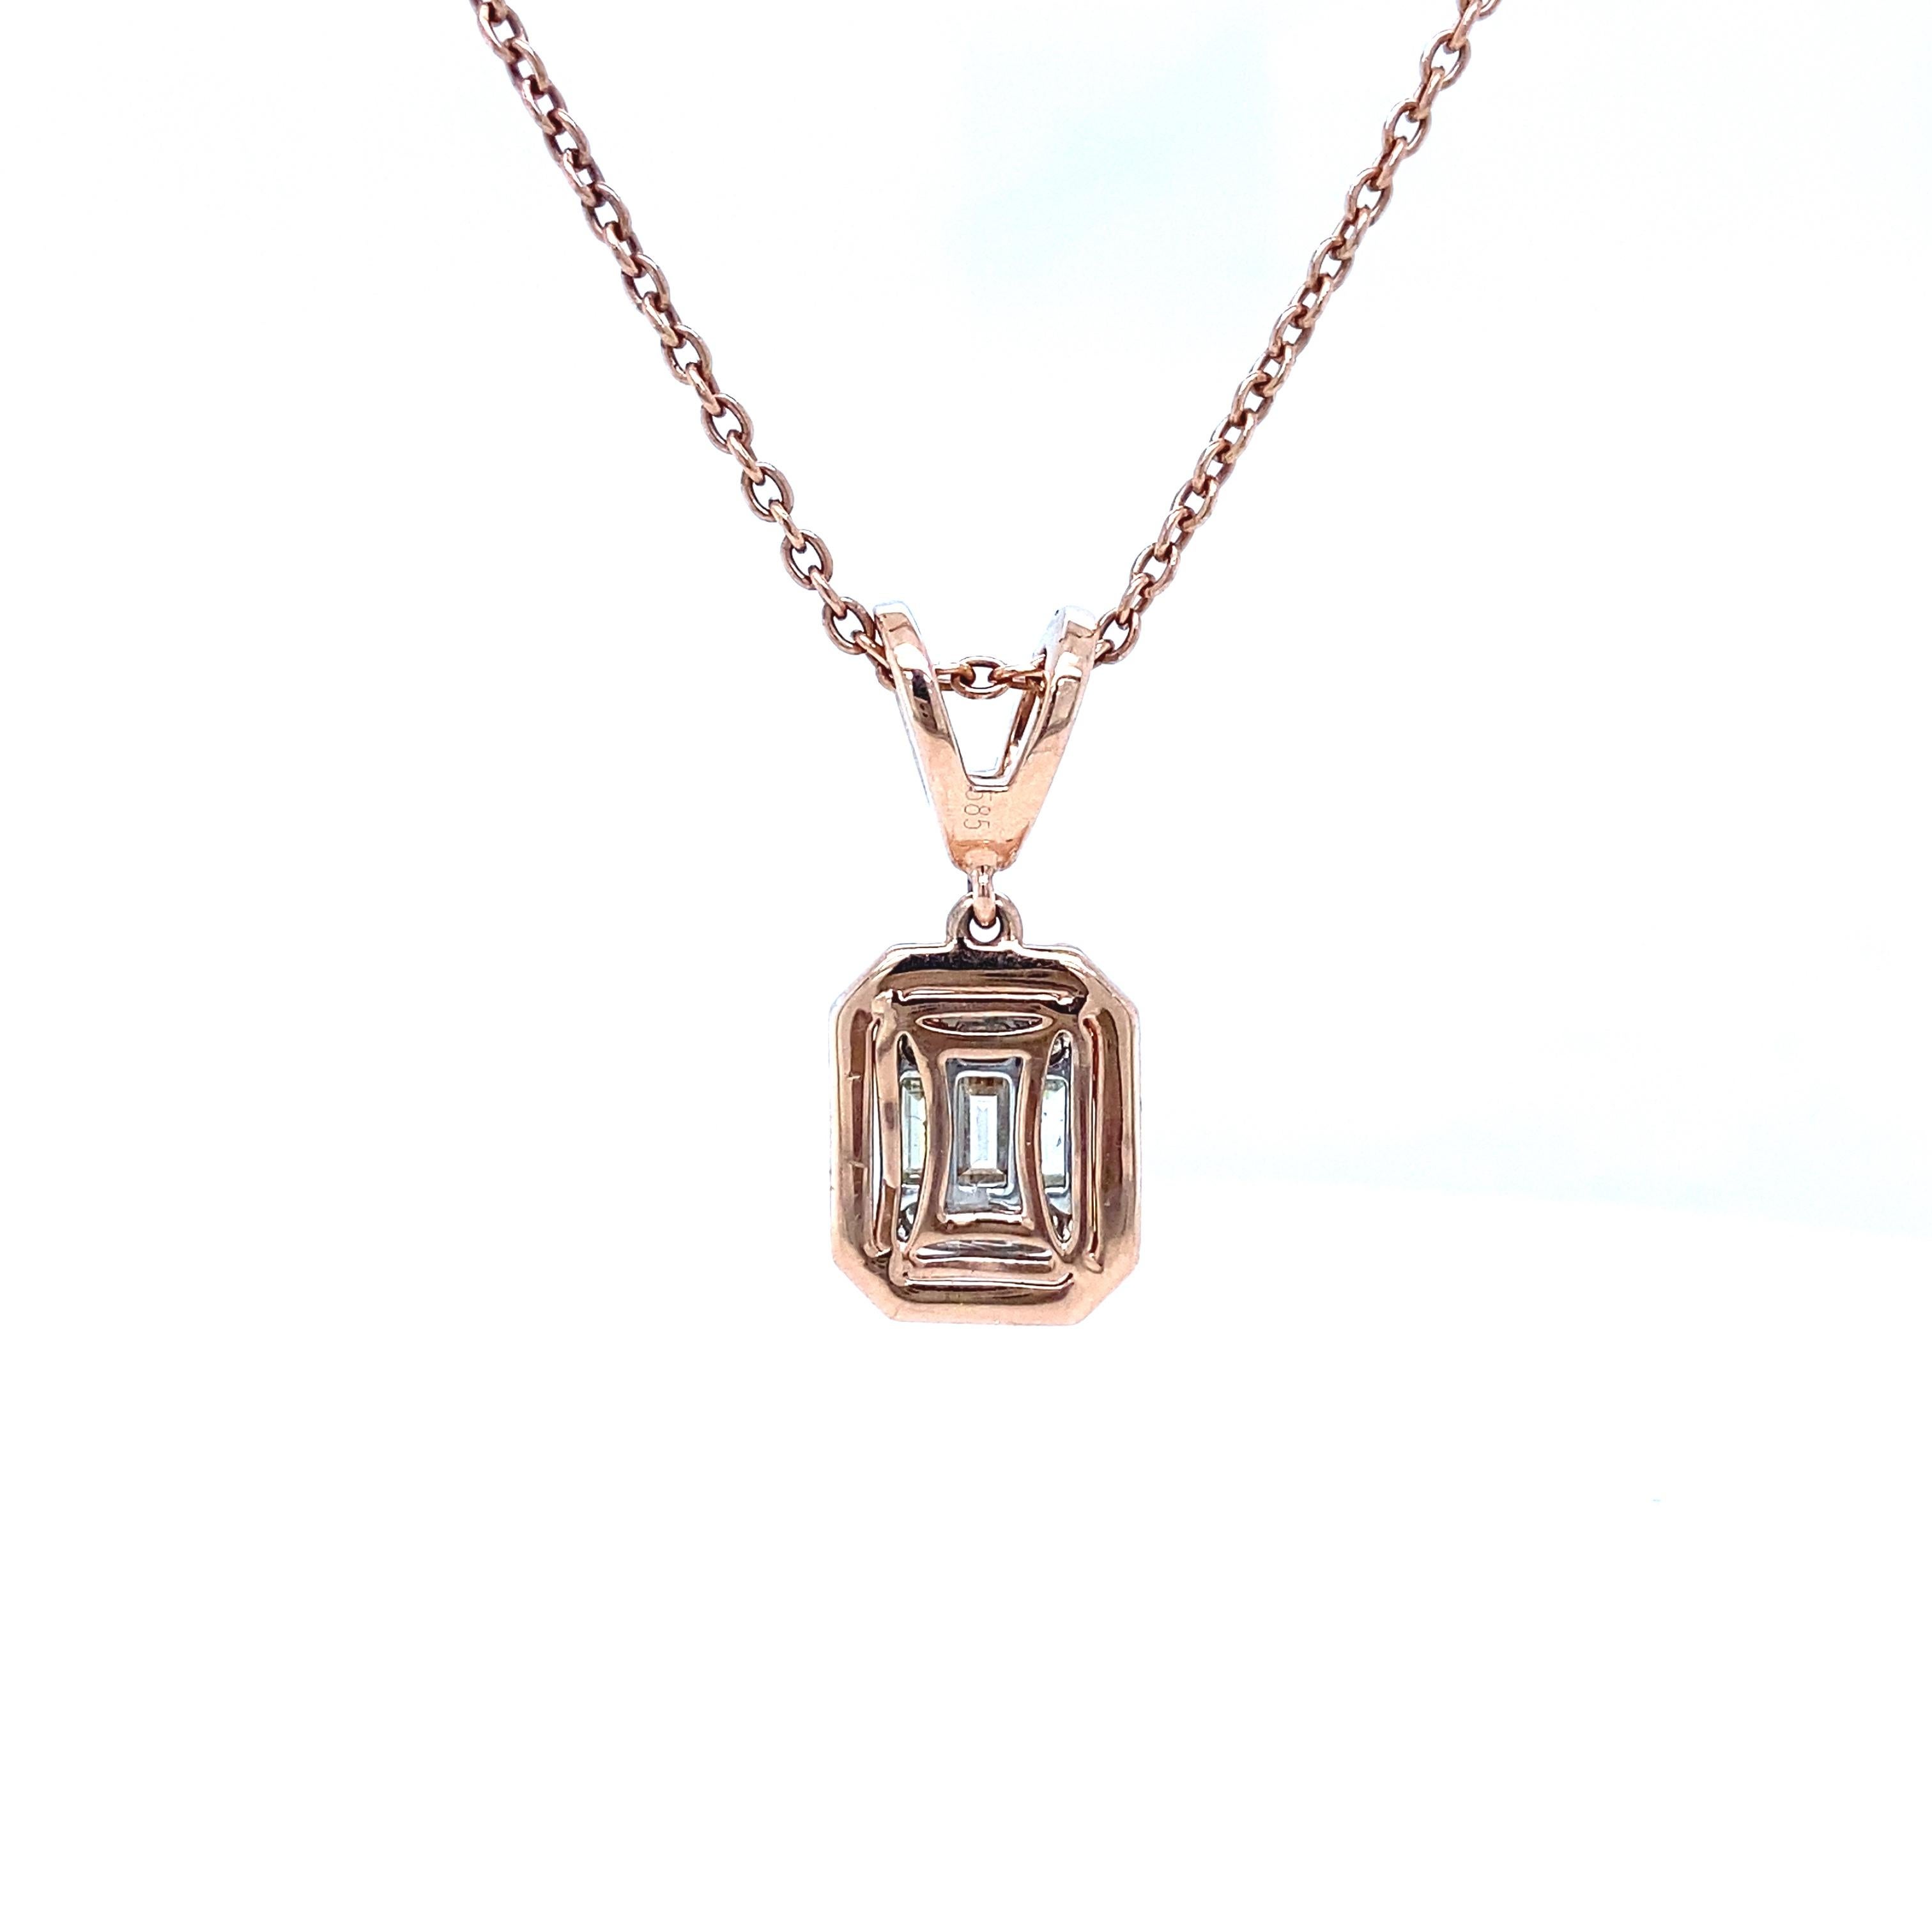 Rectangular Design Fancy Diamonds Pendant Necklace in 18k Solid Gold In New Condition For Sale In New Delhi, DL